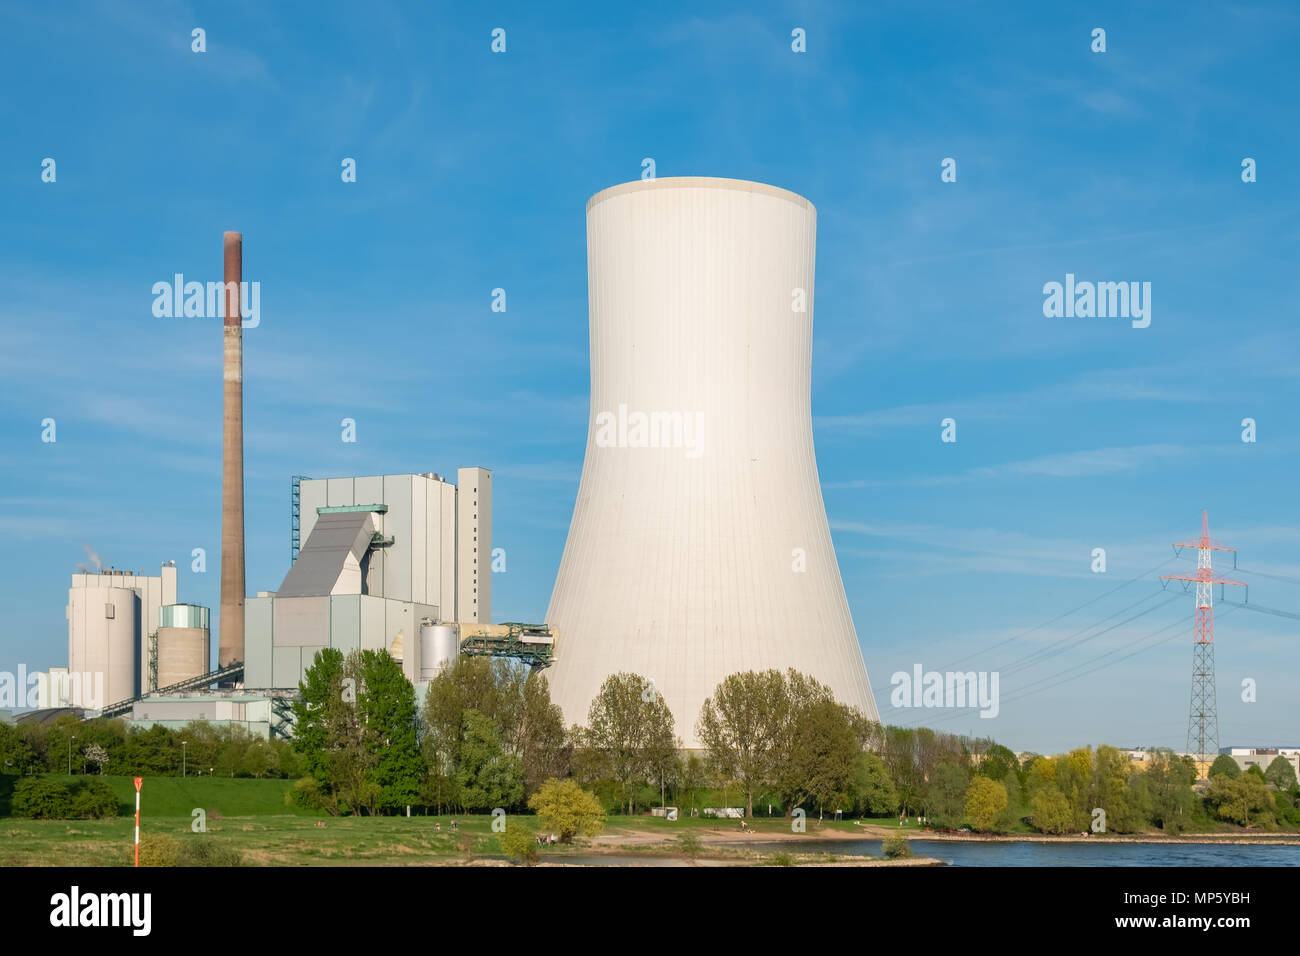 The Duisburg-Walsum coal-fired powerplant is located on the banks of the Rhine River in Germany. Stock Photo